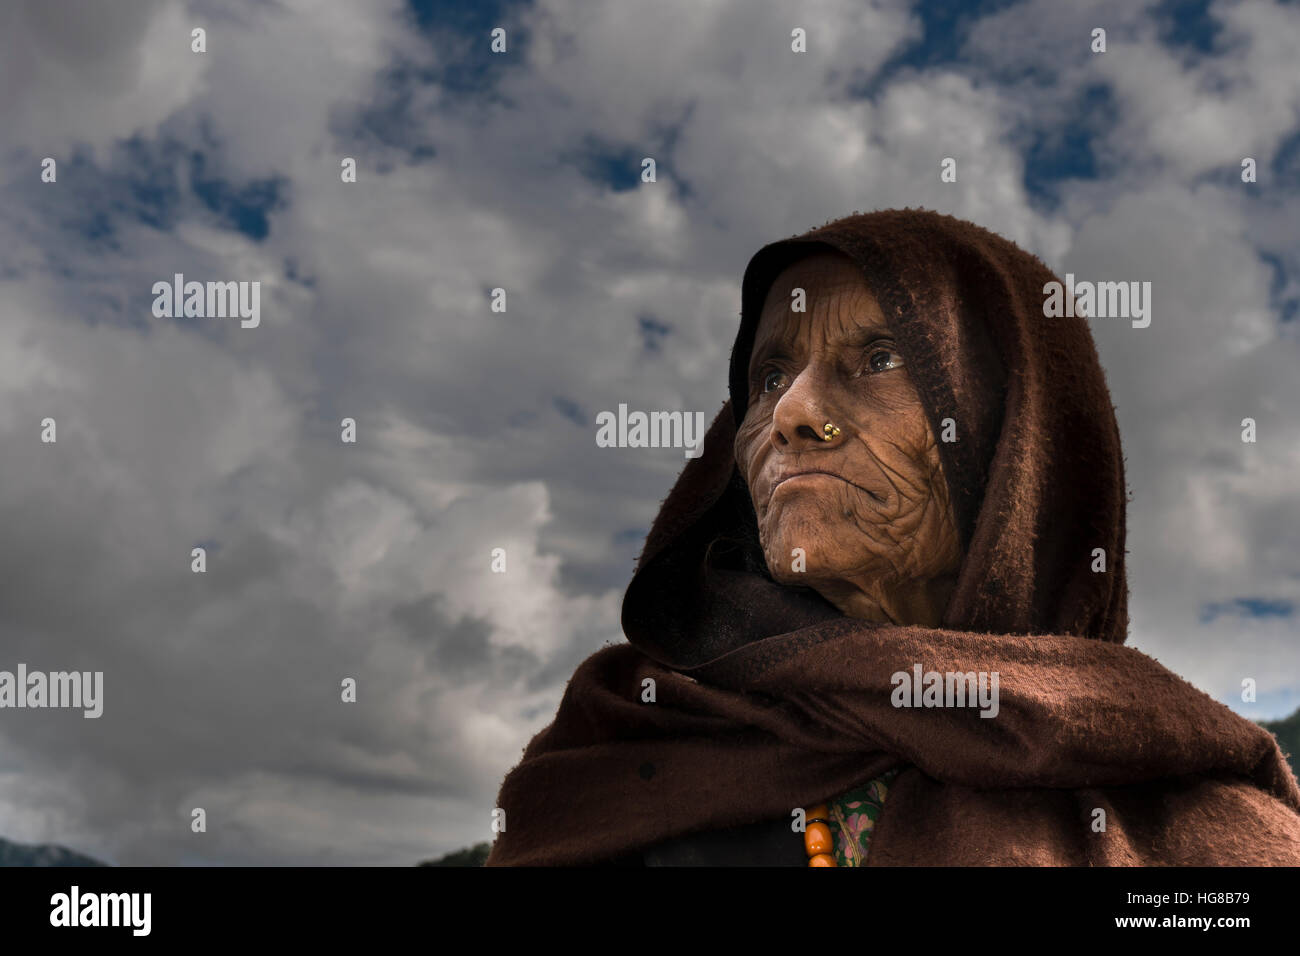 Portrait of an wrinkled, old local woman, wearing a brown scarf, Ghandruk, Kaski District, Nepal Stock Photo